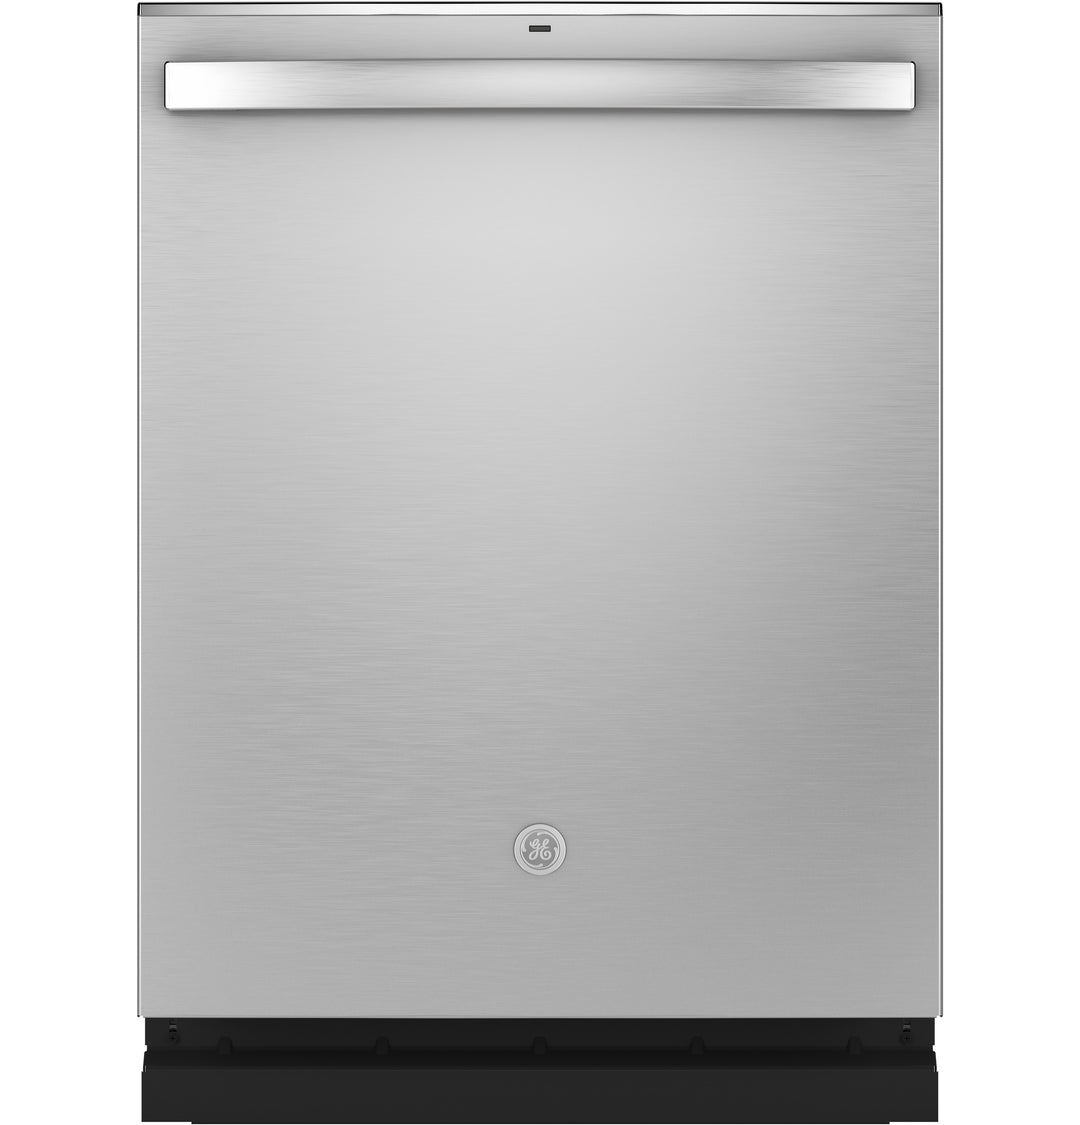 GE® Fingerprint Resistant Top Control With Stainless Steel Interior Dishwasher With Sanitize Cycle & Dry Boost With Fan Assist